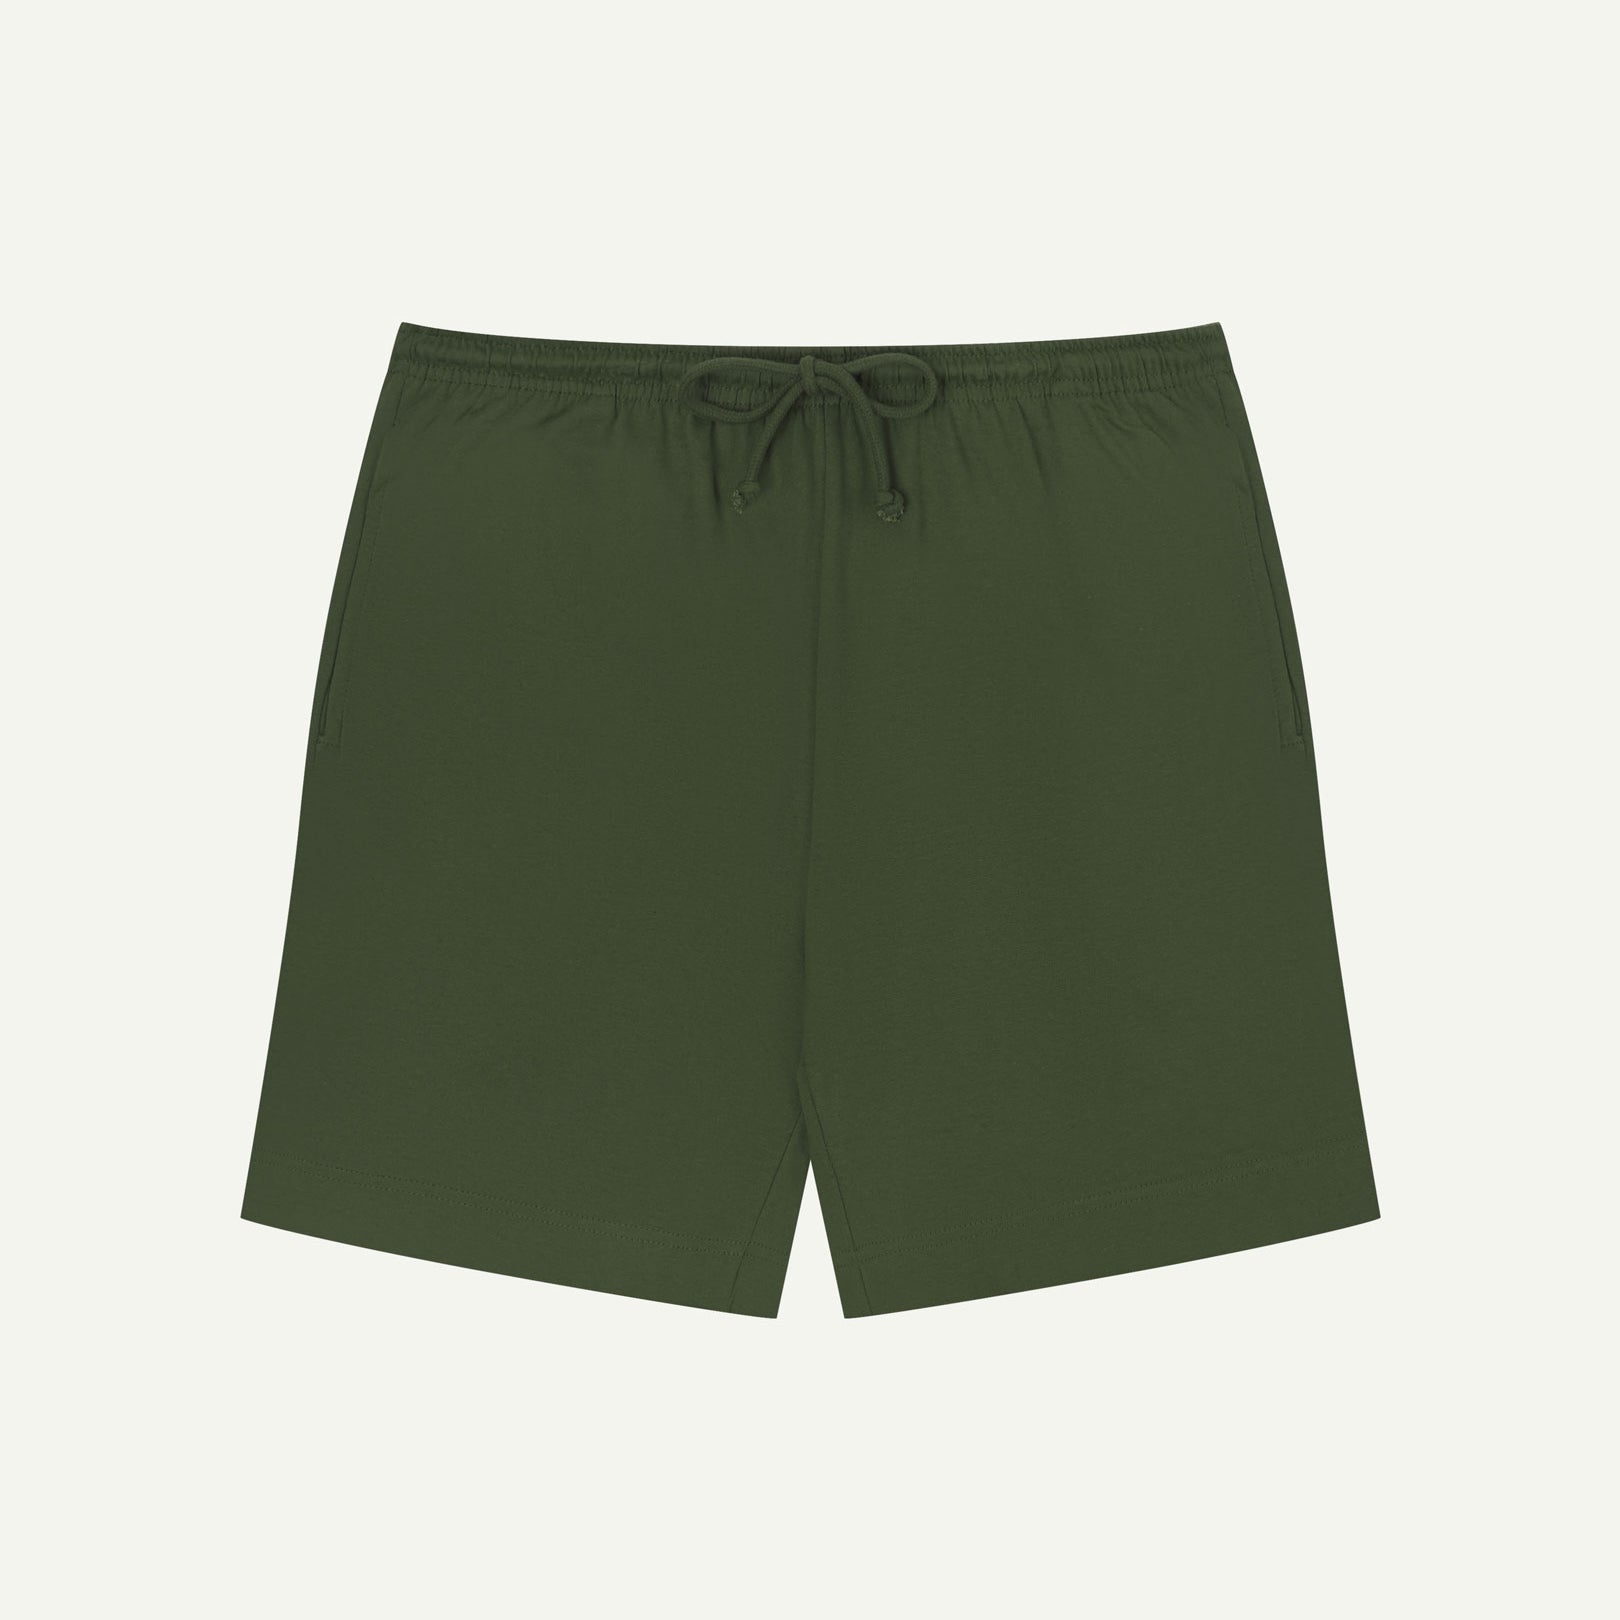 Front view of coriander-green organic cotton 7007 men's shorts by Uskees against white background. Clear view of drawstring waist.